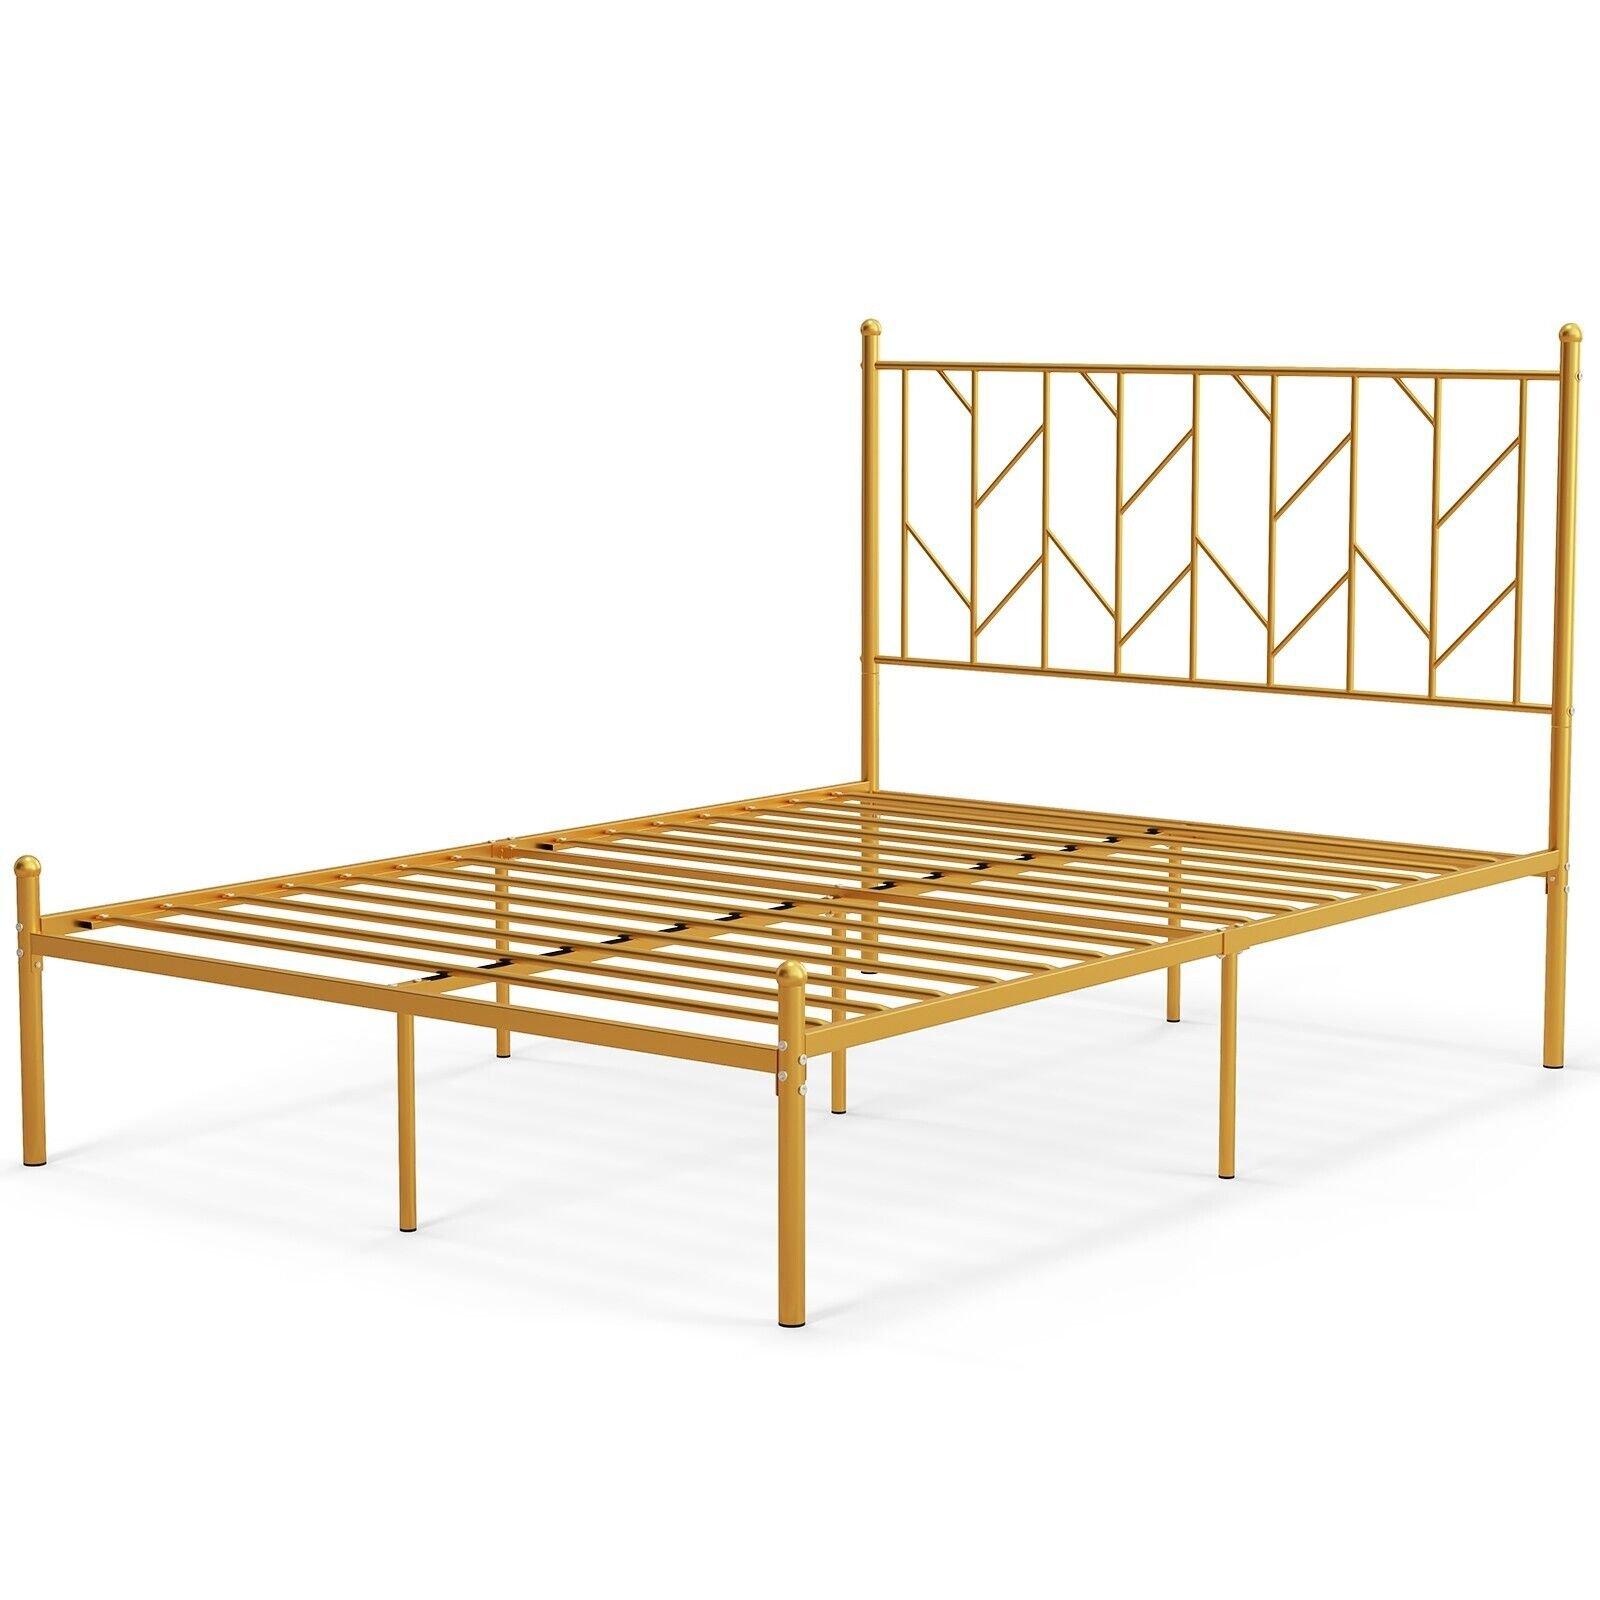 4.6FT Double Metal Bed Frame Heavy-duty Slatted Platform Bed with Headboard